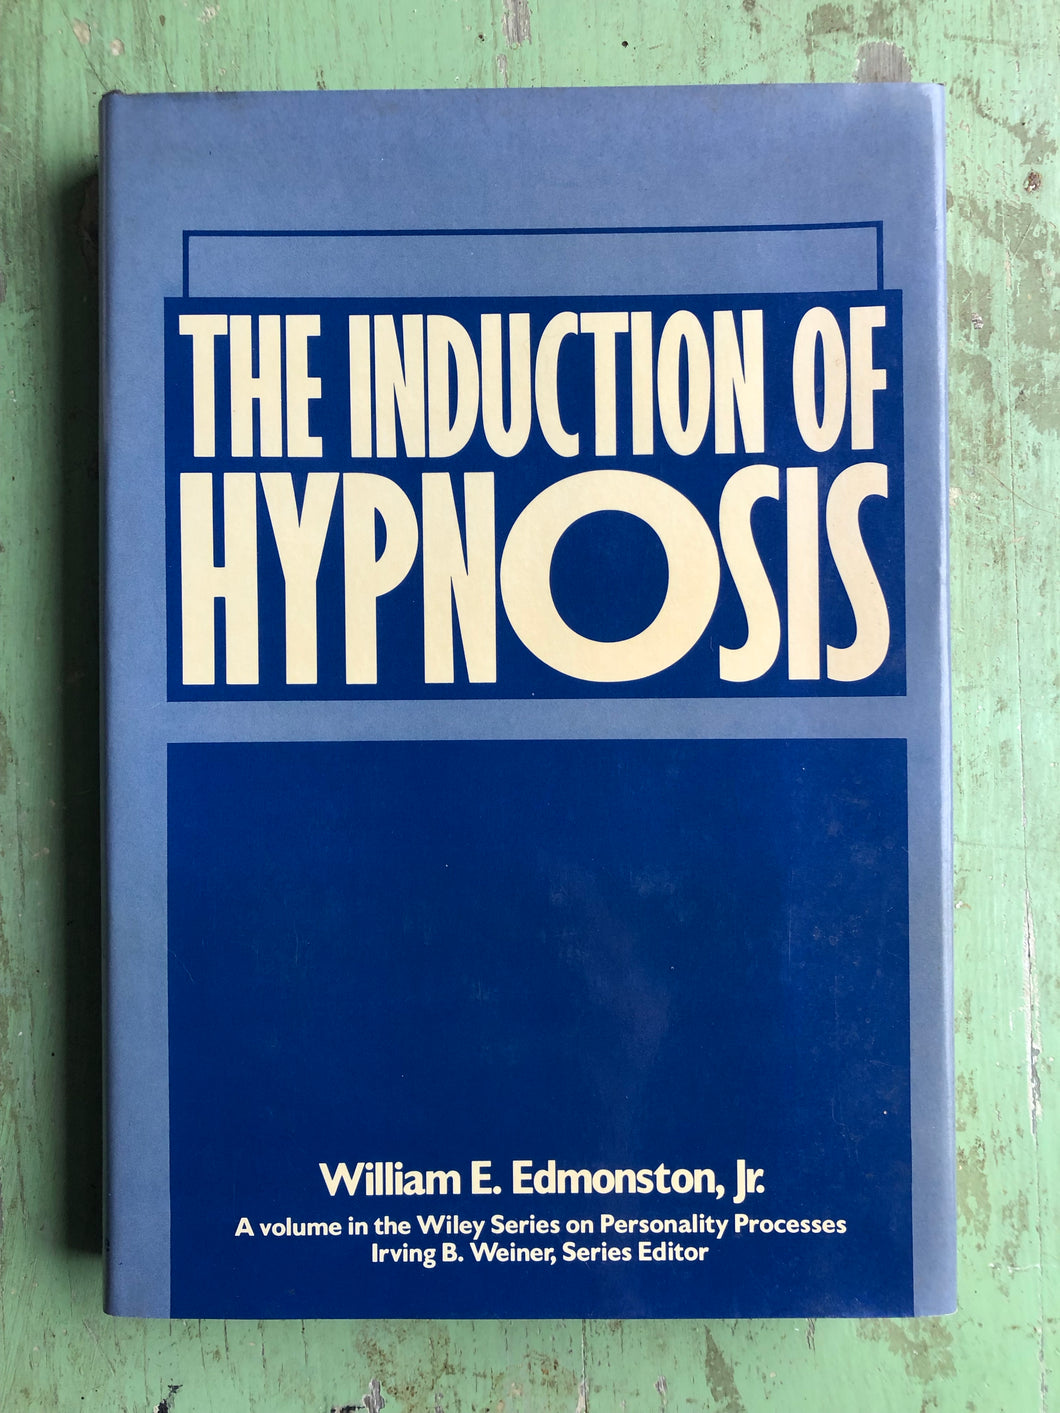 The Induction of Hypnosis. by William E. Edmonston, Jr.